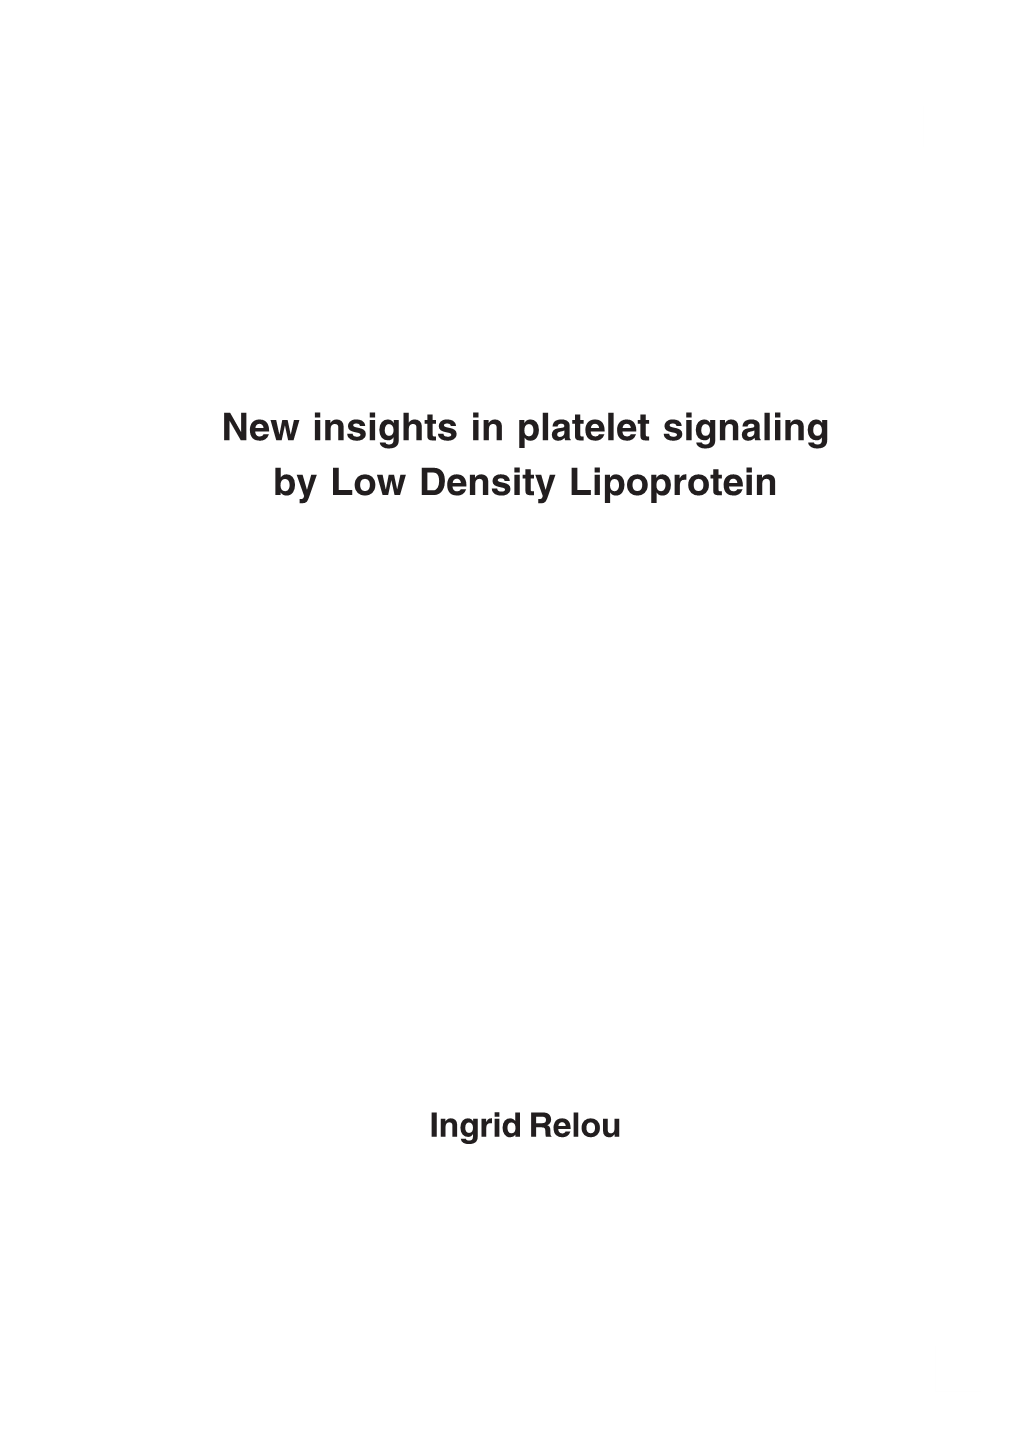 New Insights in Platelet Signaling by Low Density Lipoprotein